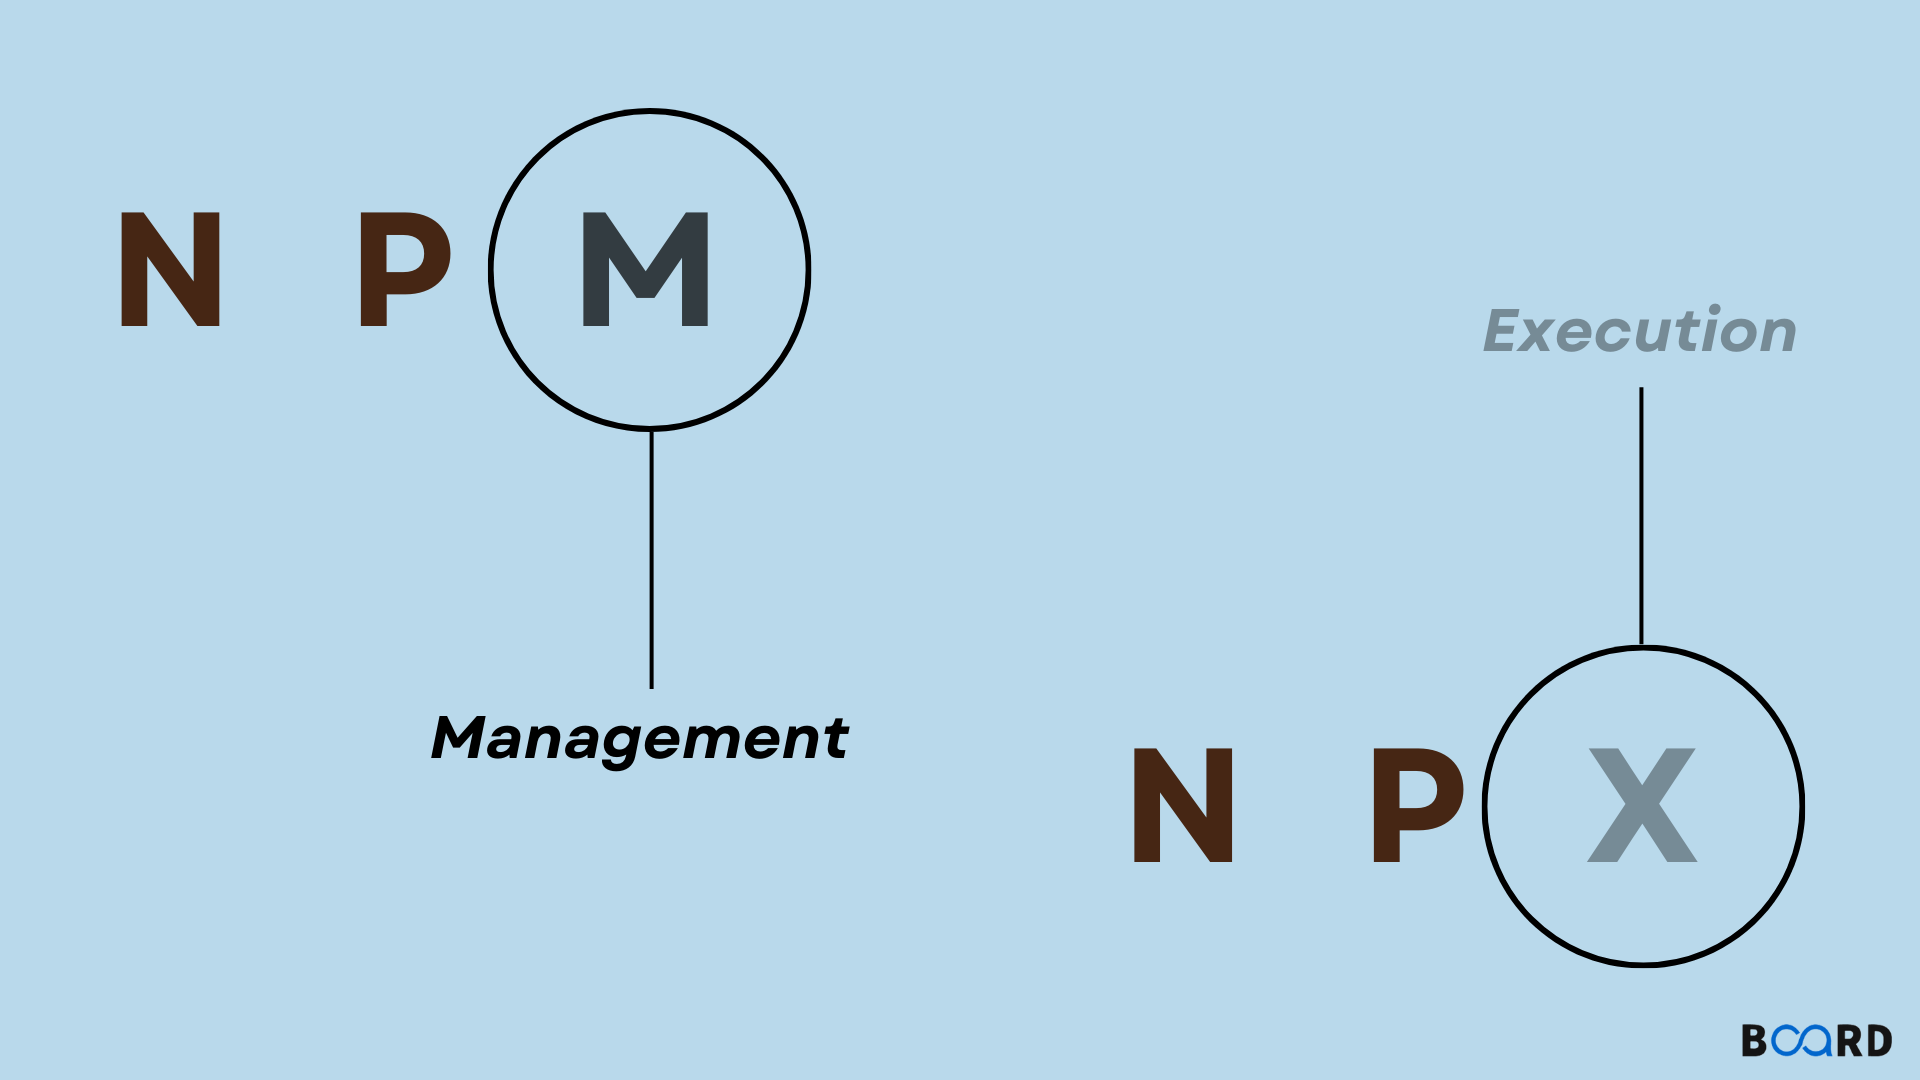 NPM and NPX: Explanation and Differences